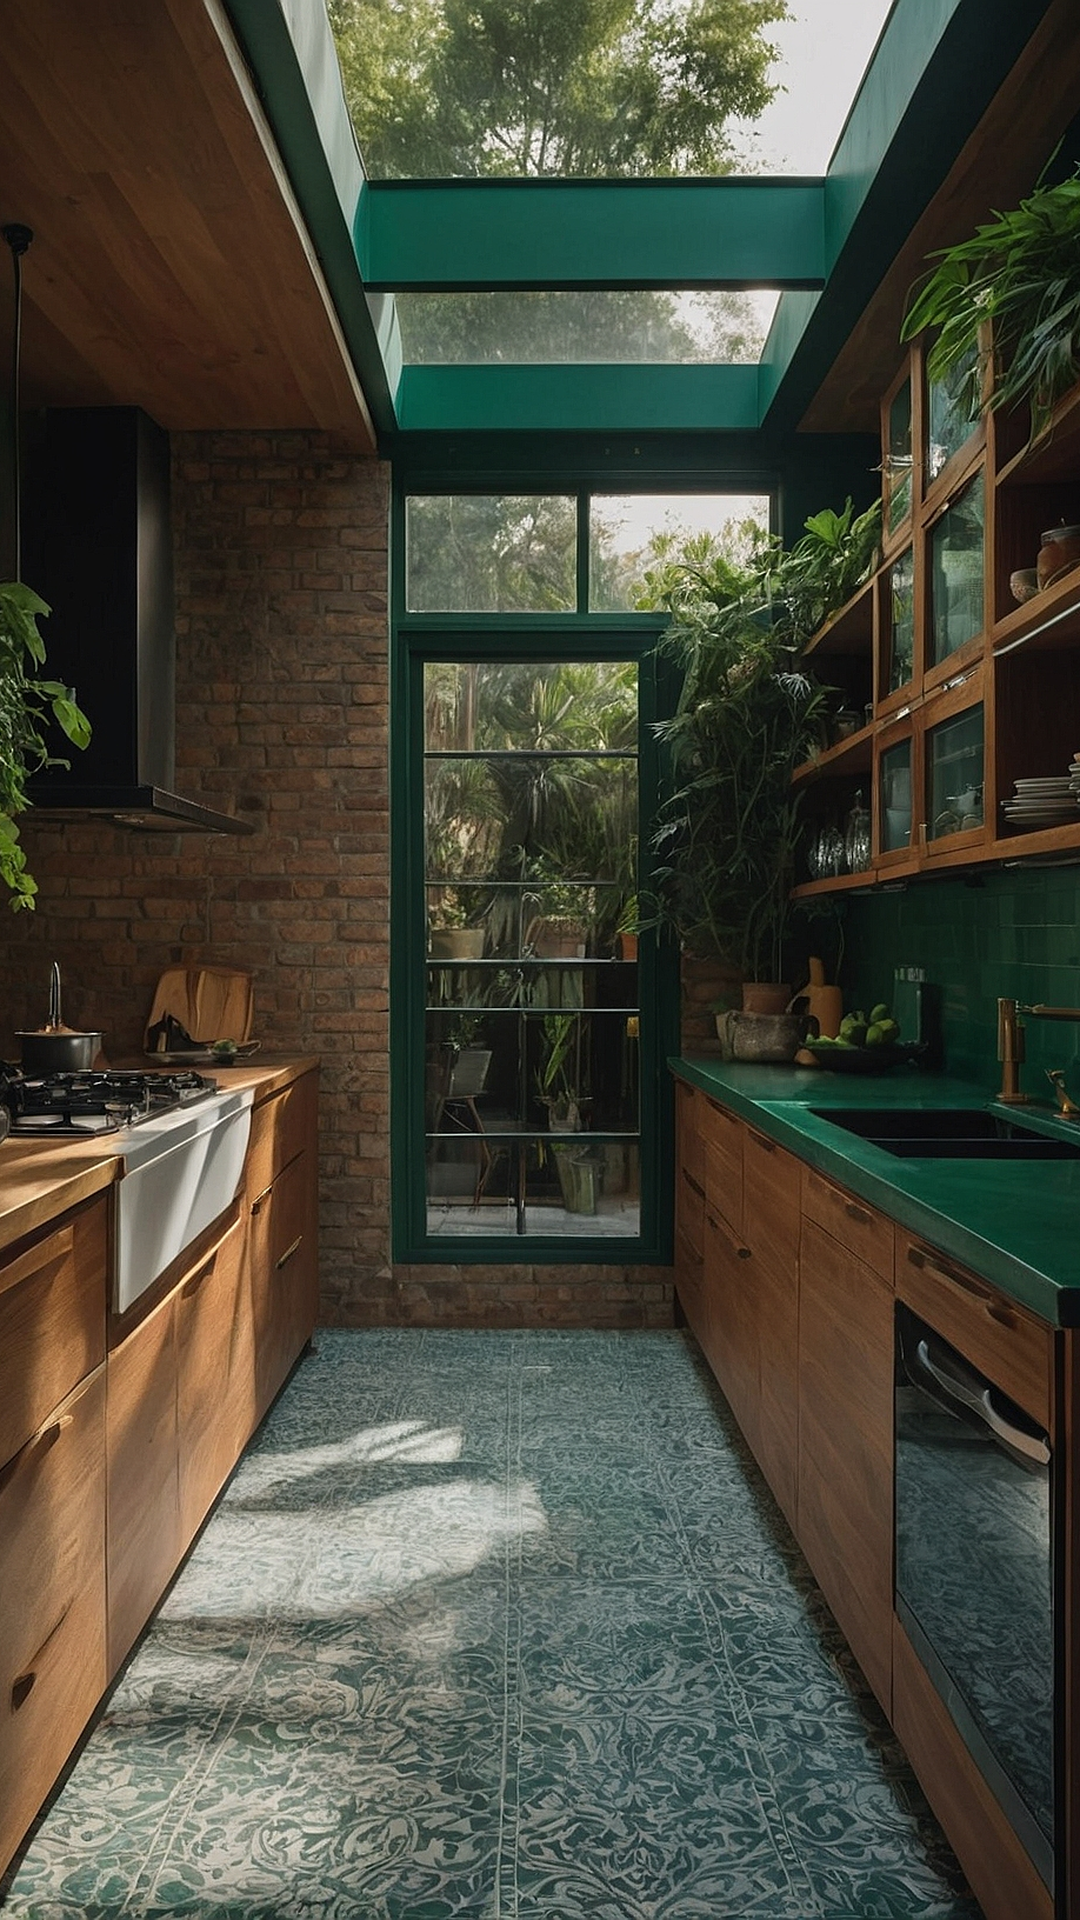 Green Bliss: Relaxation in the Kitchen